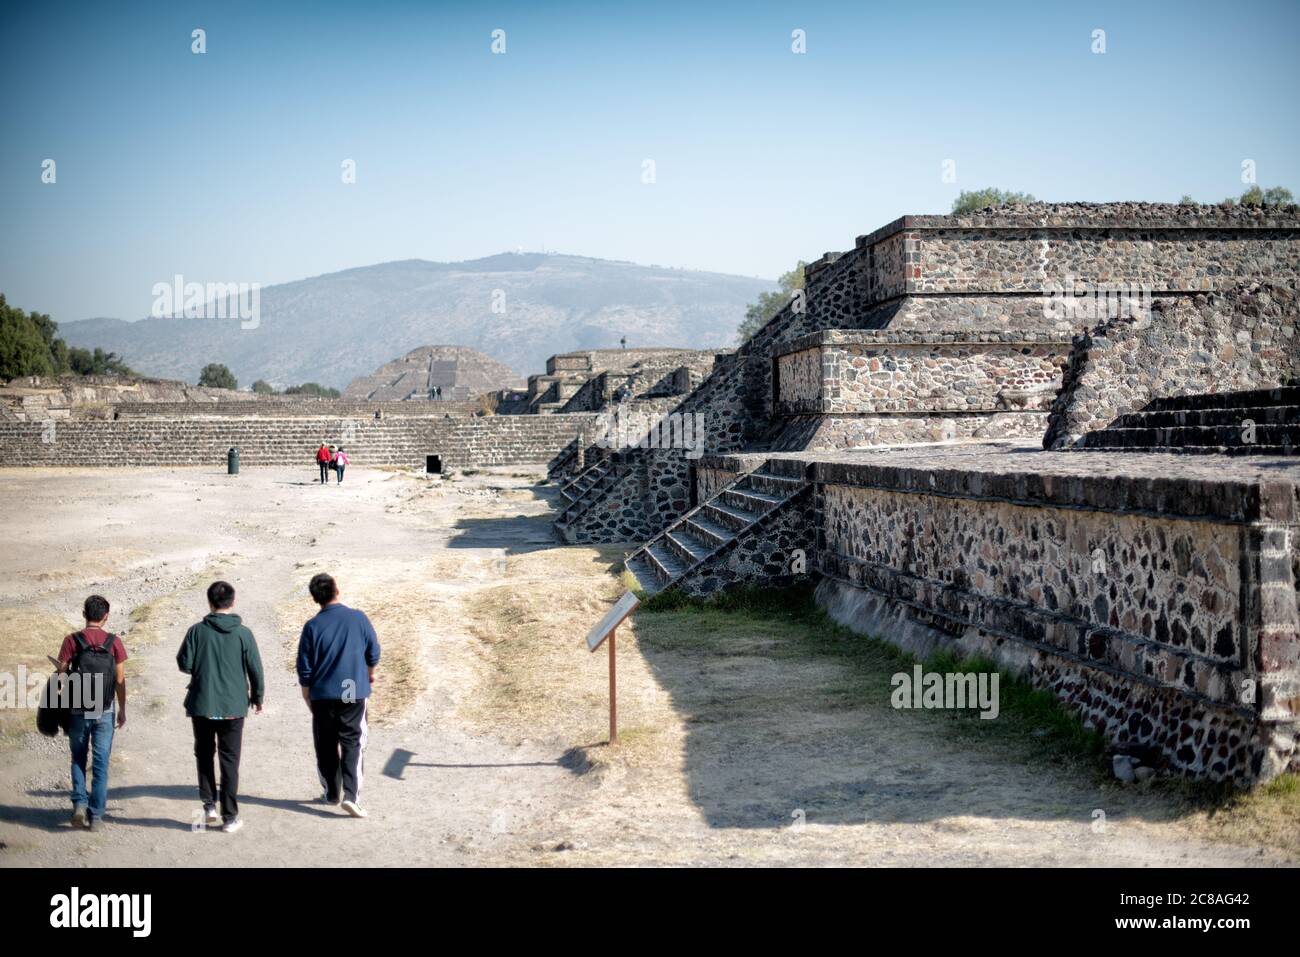 TEOTIHUACAN, Mexico - Walking the Avenue of the Dead at Teotihuacan. It was the city's main street. Teotihuacan is an ancient Mesoamerican city locate Stock Photo